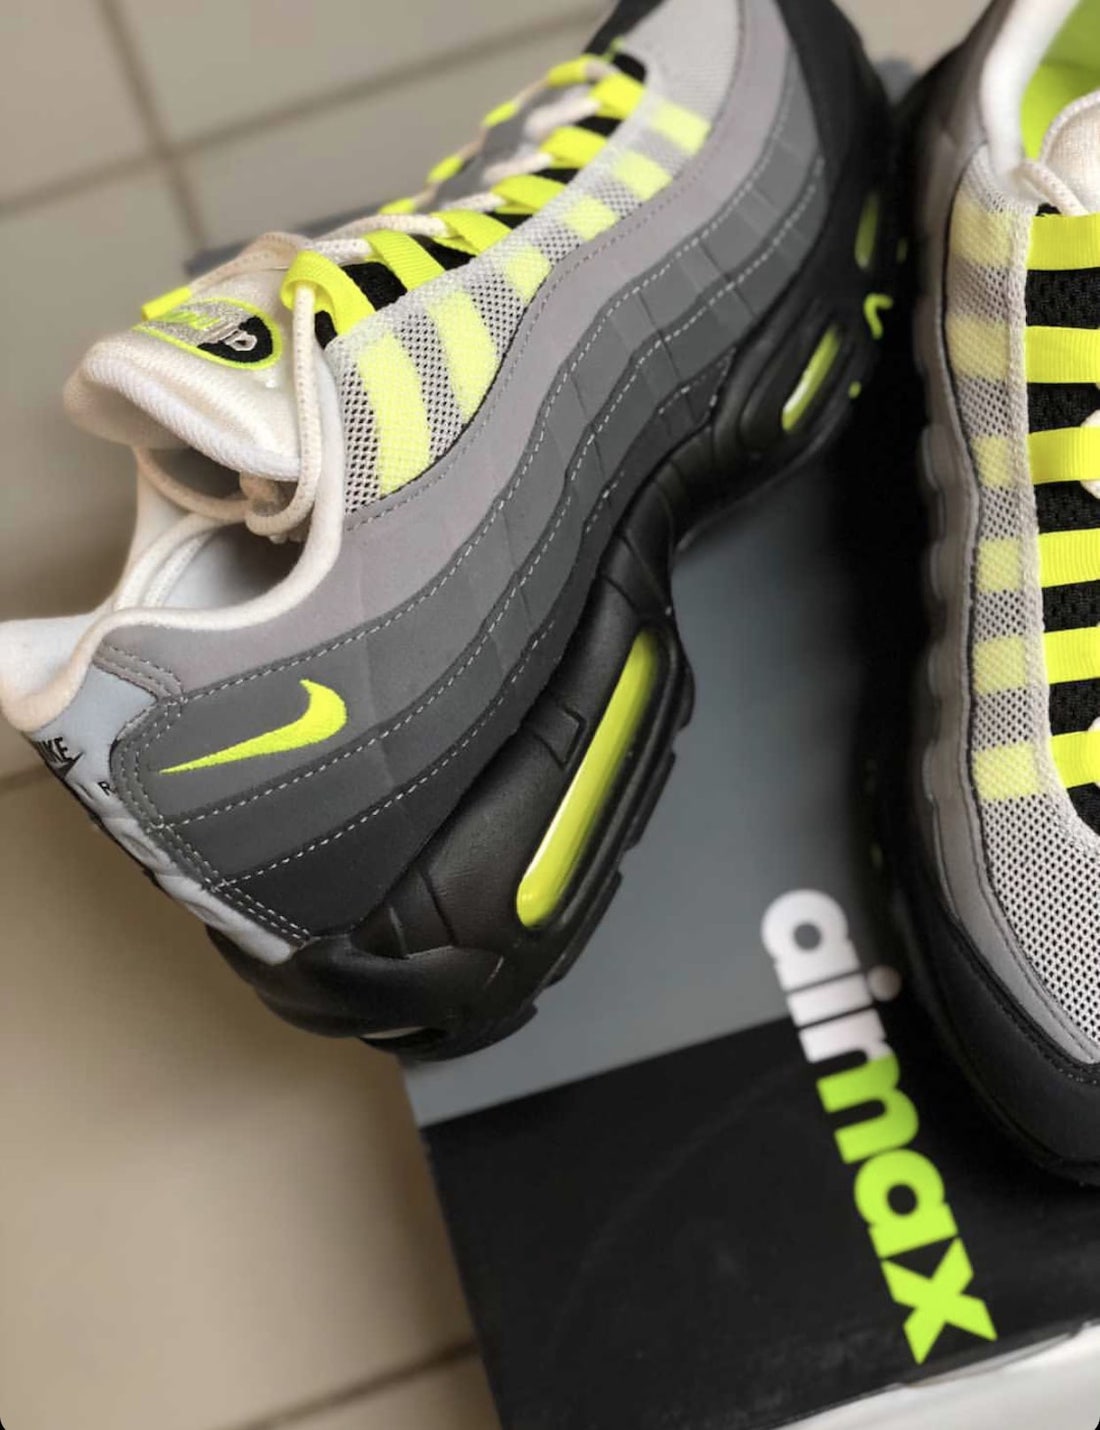 Nike Air Max 95 OG Neon 2020 CT1689-001 Release Date Info